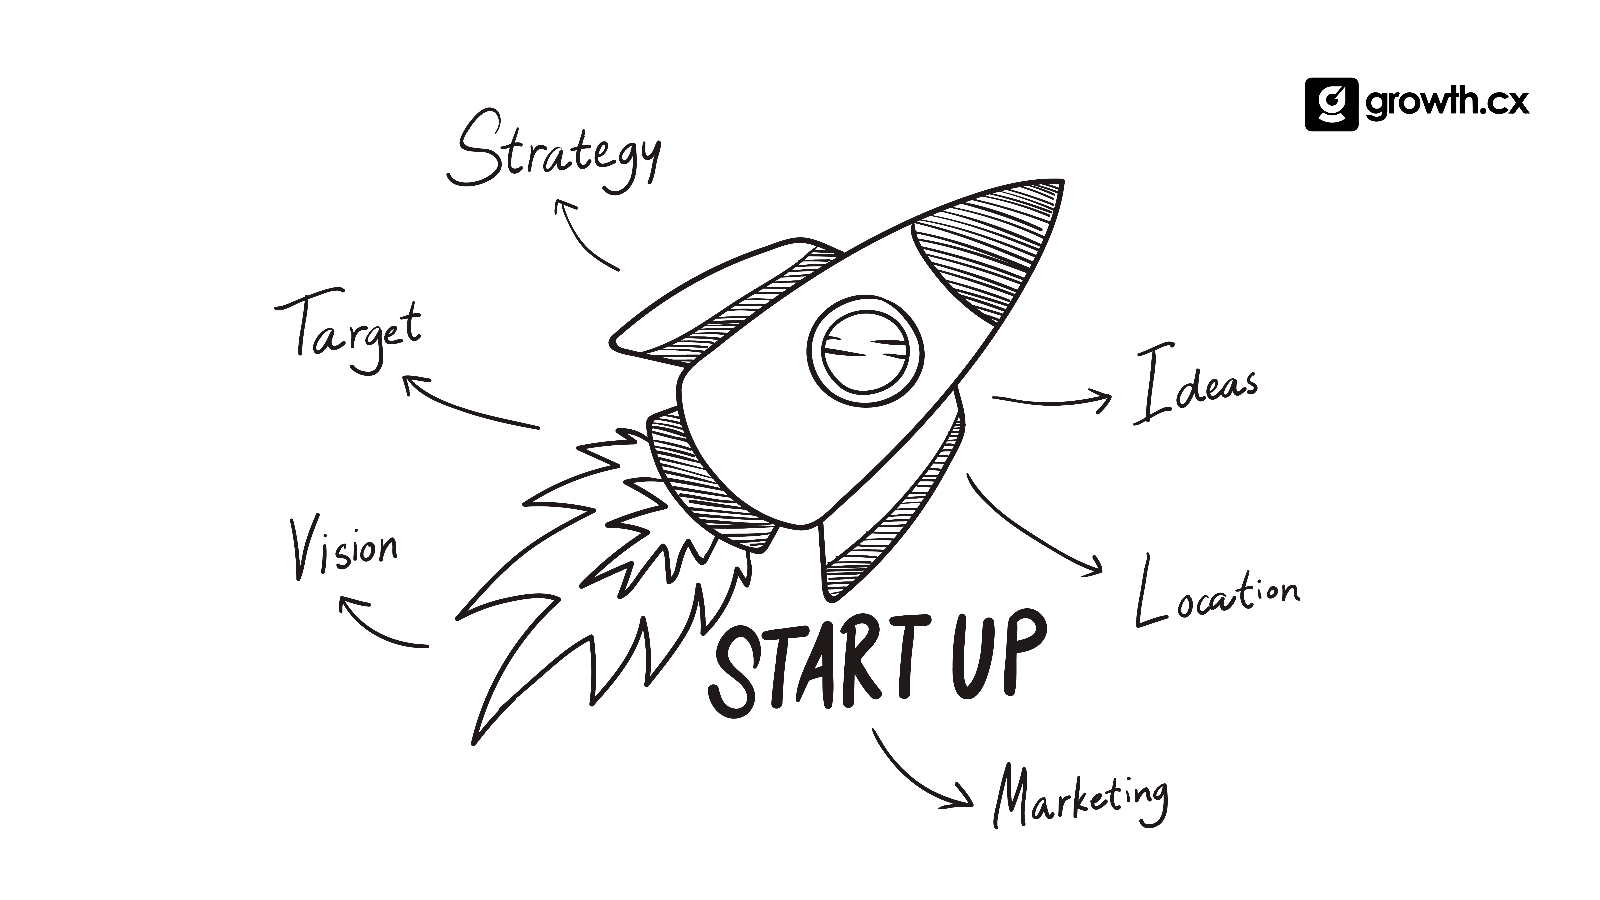 How To Market Your B2B SaaS Startup?